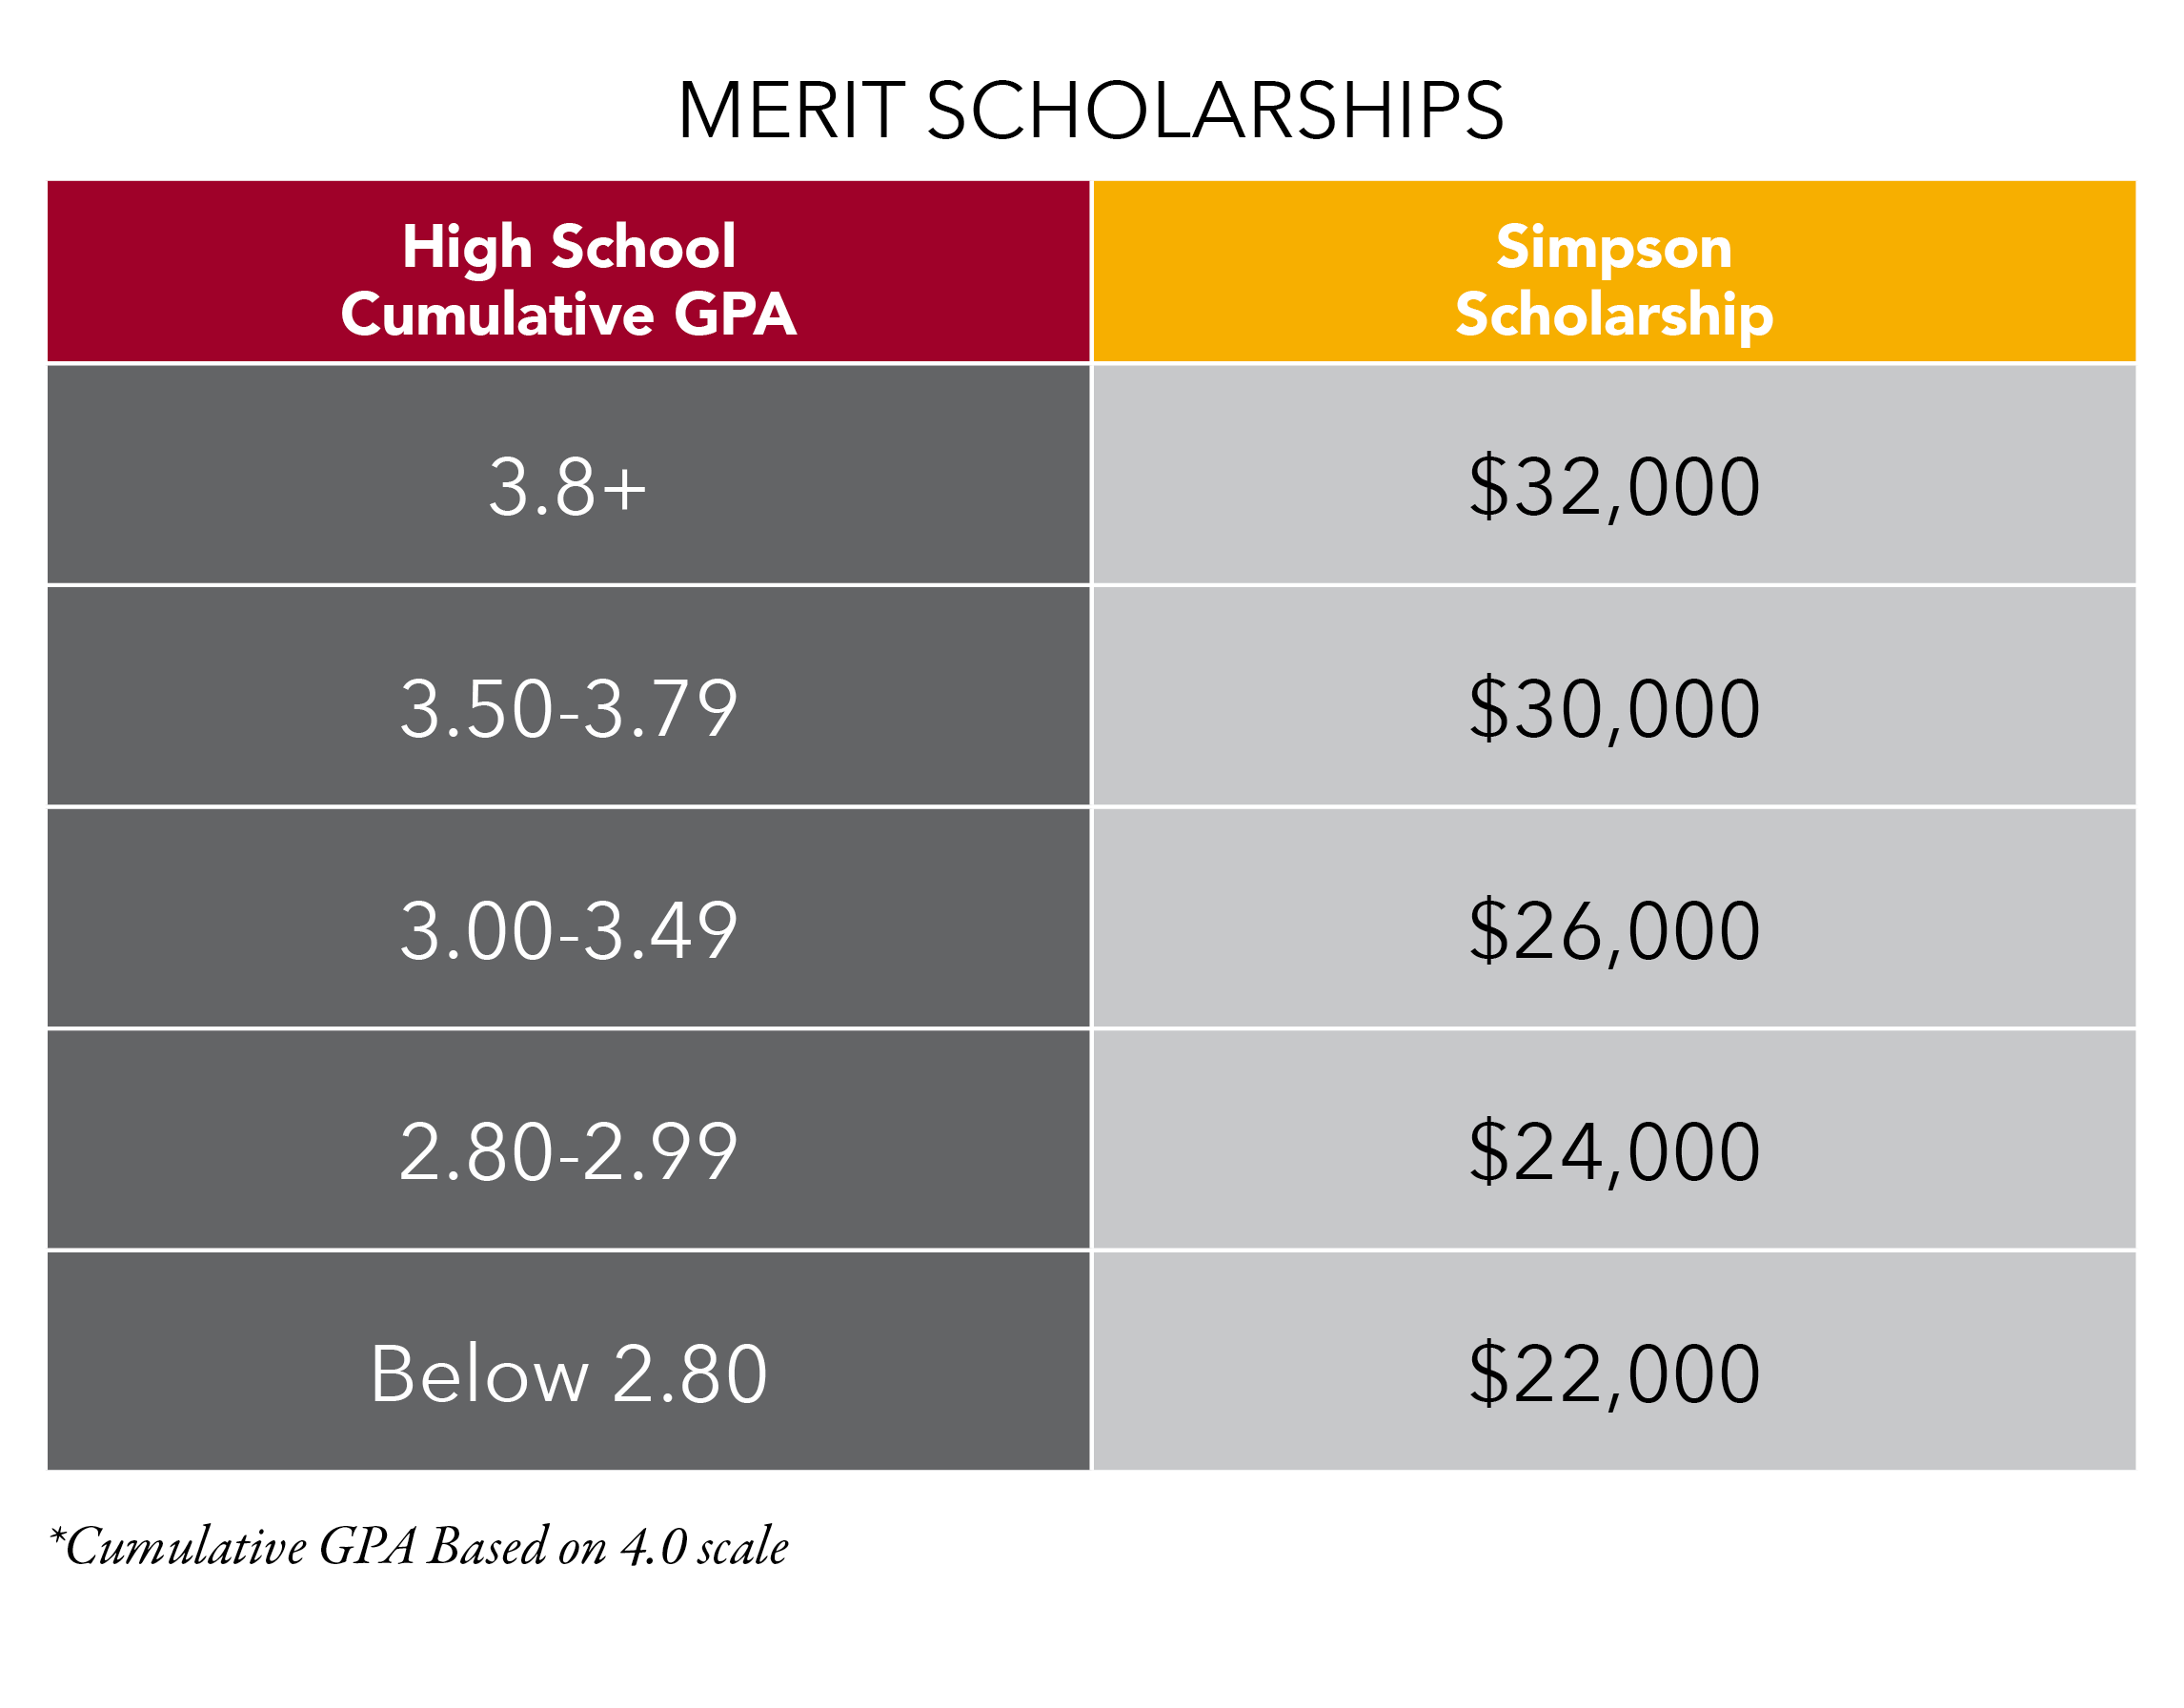 High School GPA Compared to Simpson Scholarship